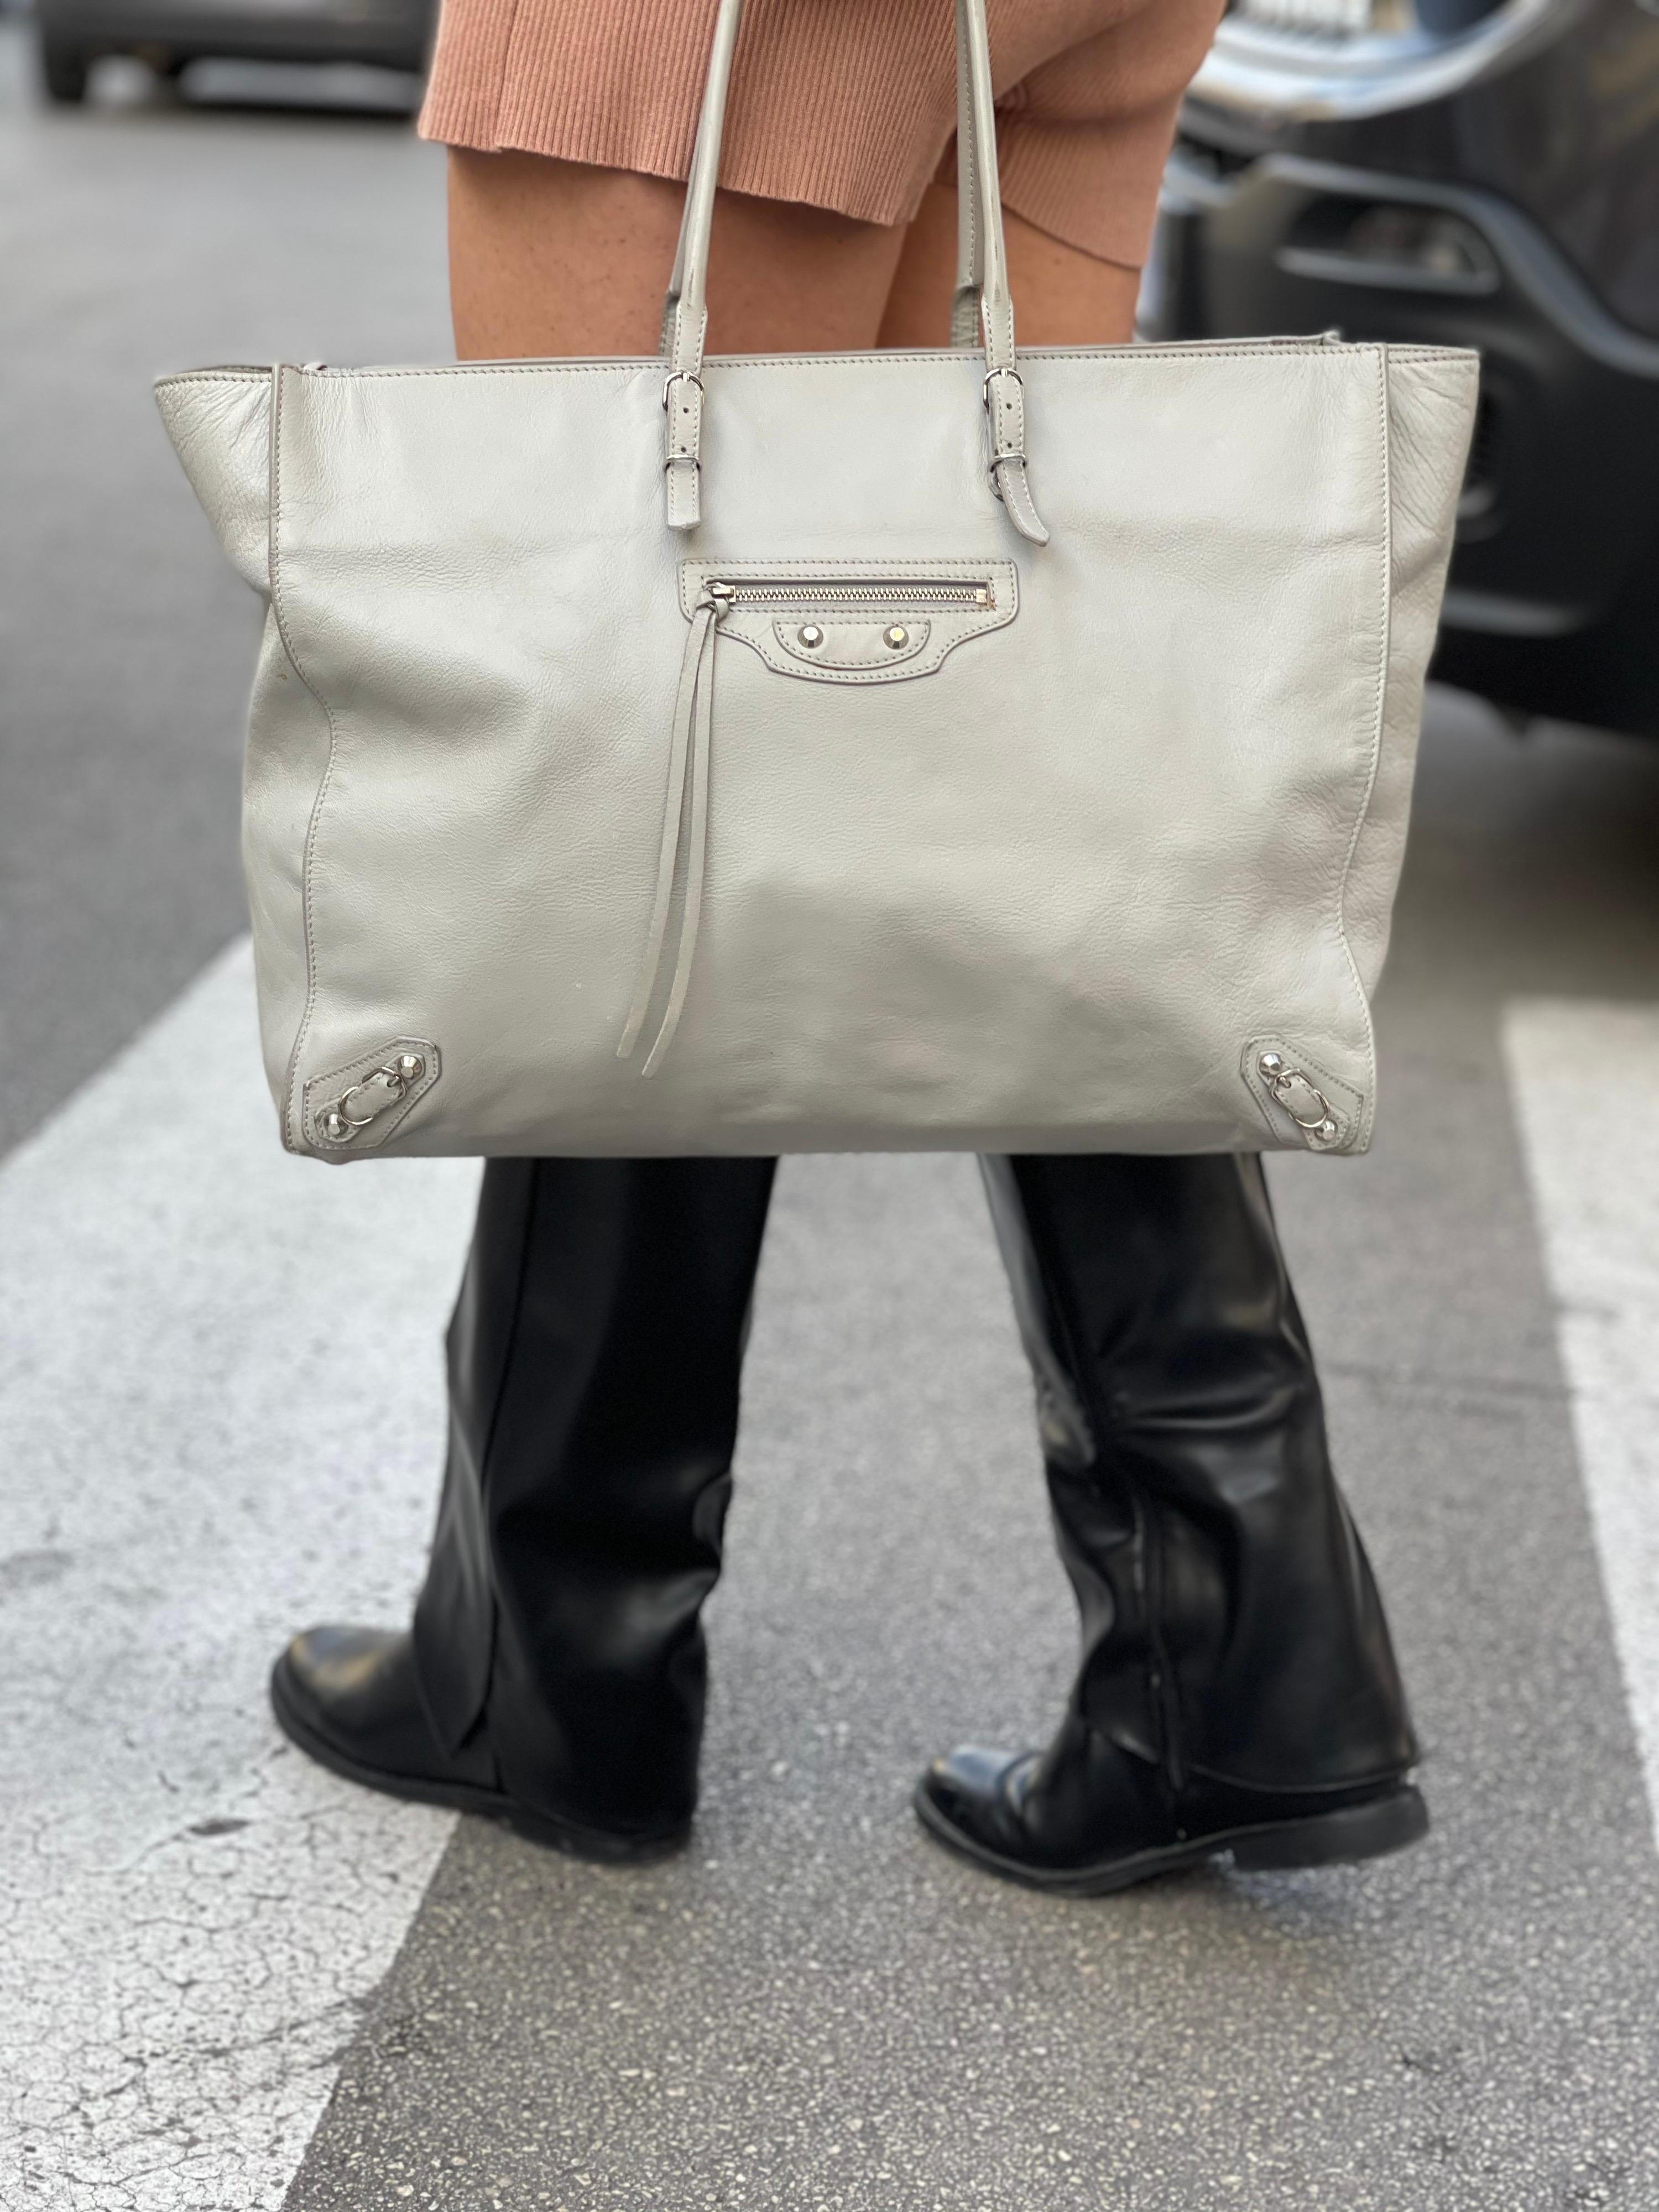 Shopping bag signed Balenciaga model Paiper large size in cement-colored leather. It features a pocket on the front, a suede interior with double pocket and a double handle to be worn on the shoulder or carried by hand.